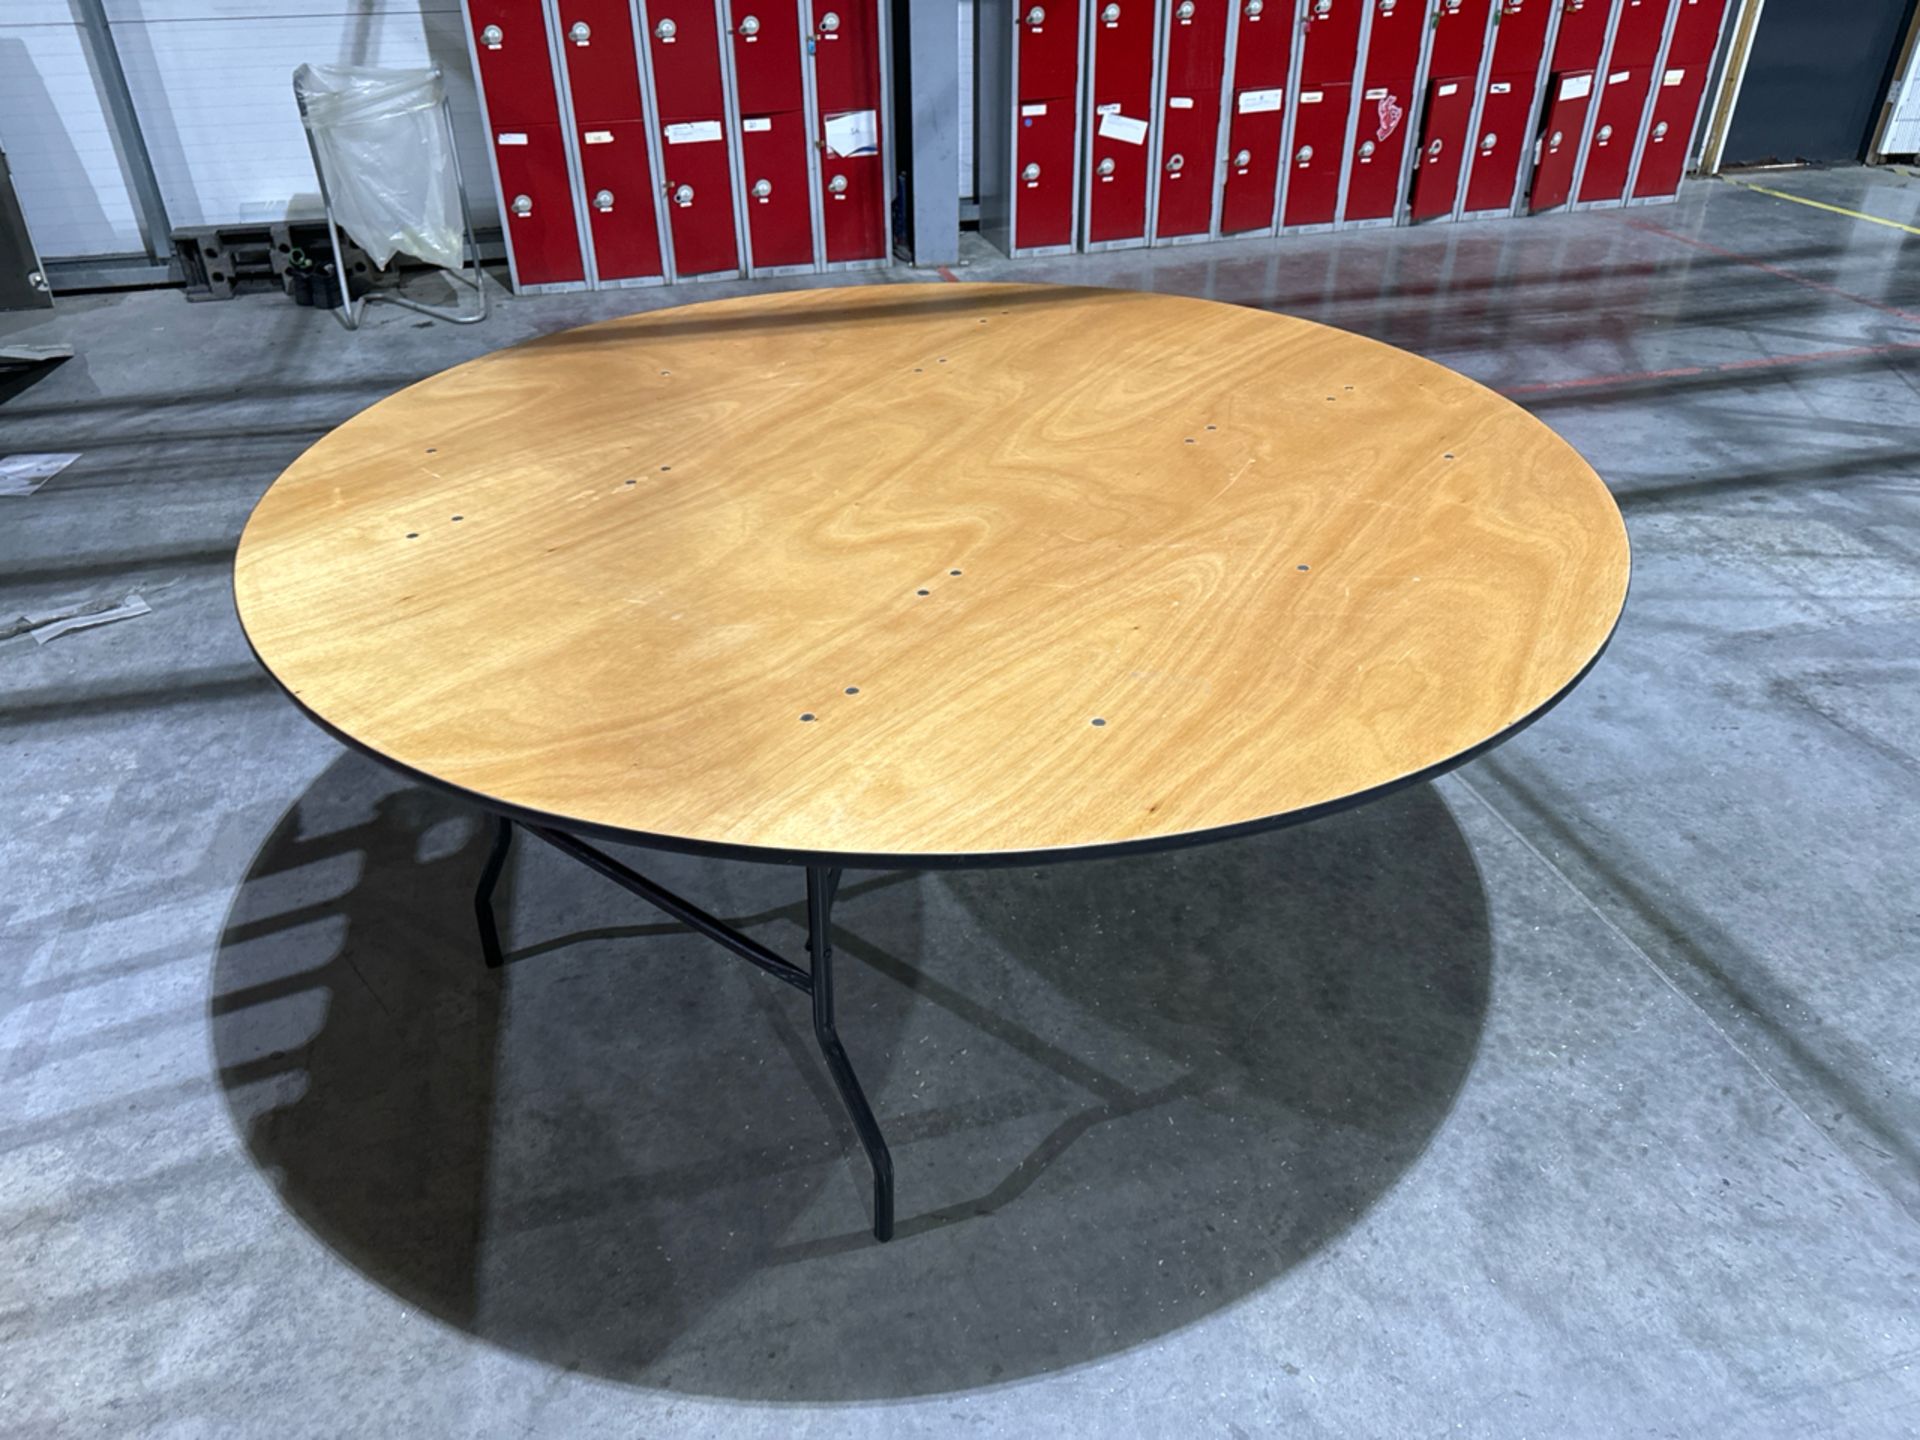 6ft Round Conference Table - Image 2 of 3